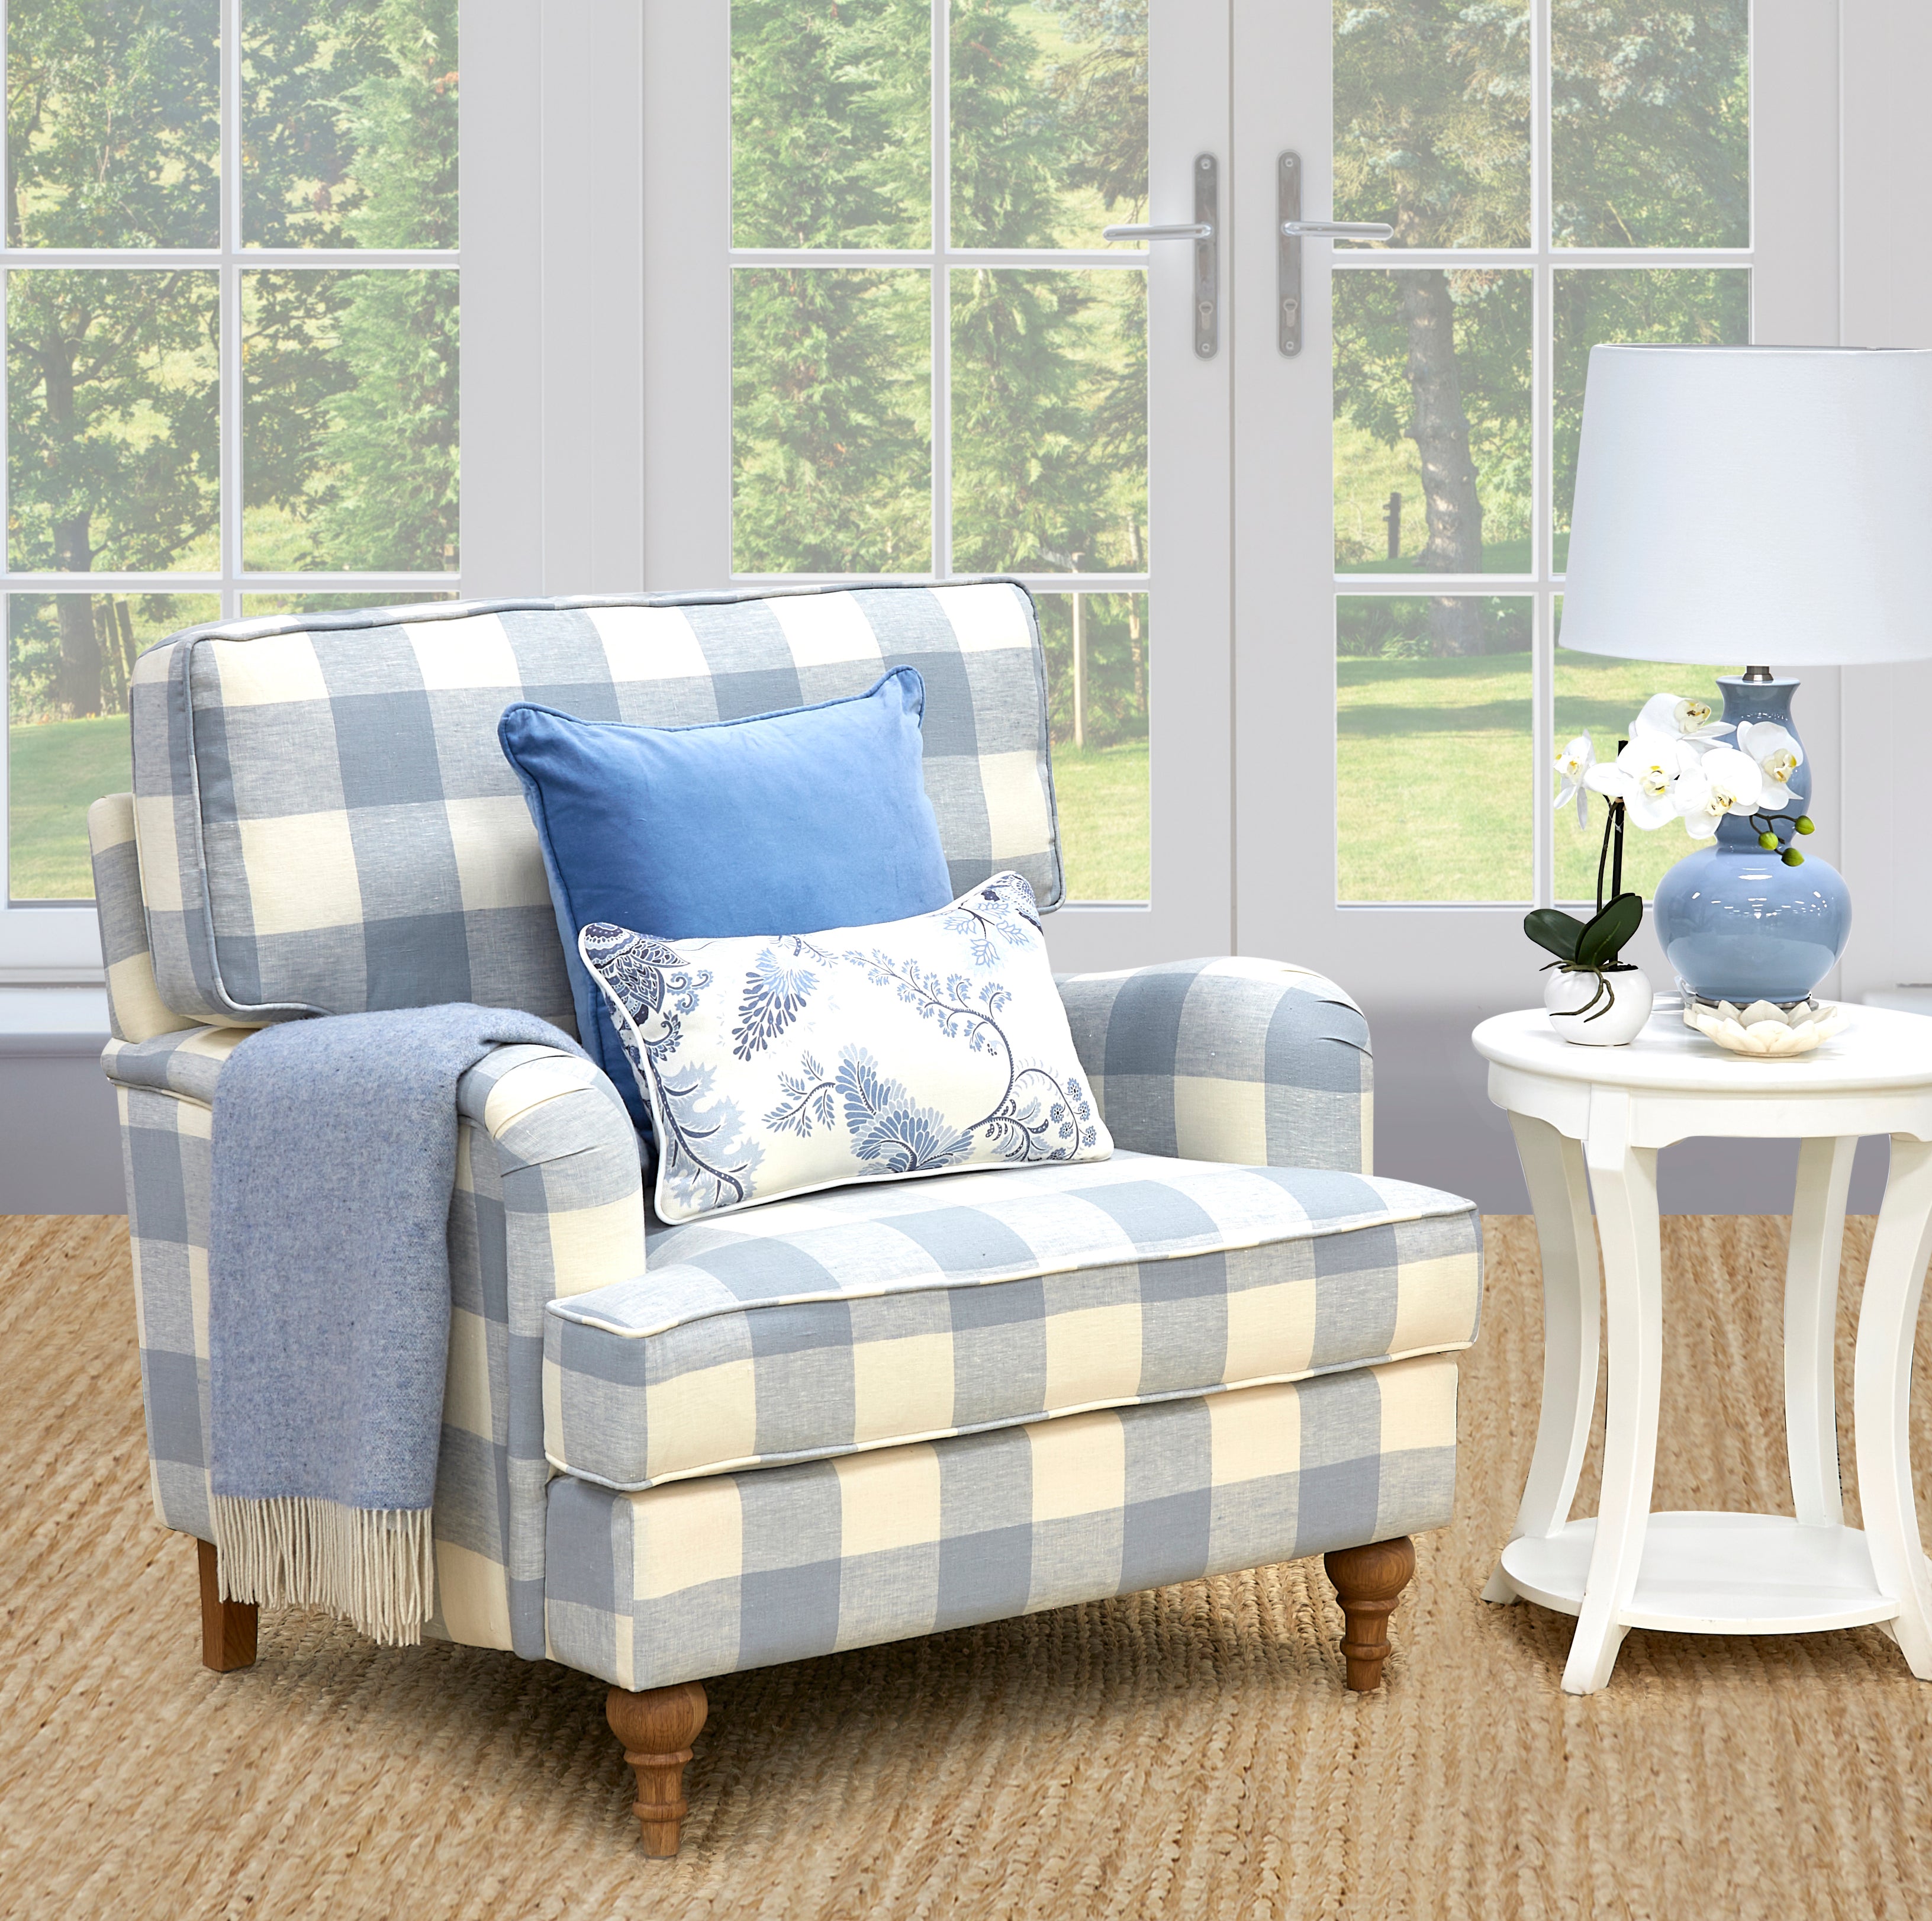 Duck Egg Blue Buffalo Check Roll Armchair - DUE MAY - ONLY 2 LEFT IN CONTAINER